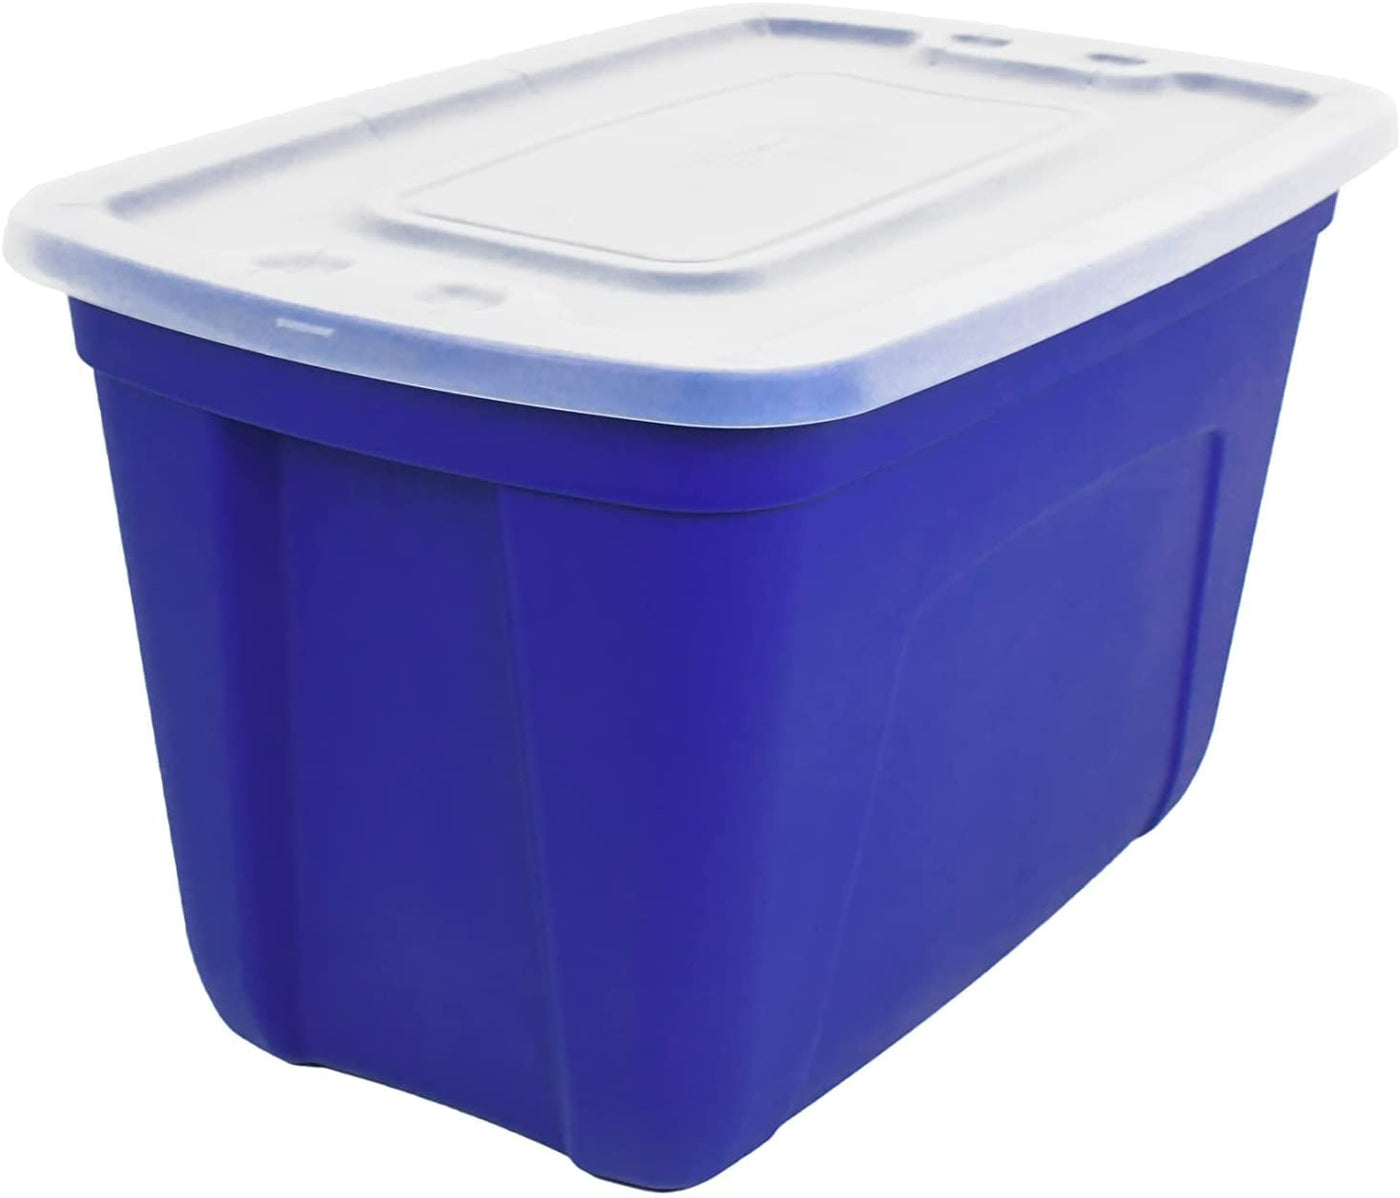 SimplyKleen Large Storage Bins with Lids, 18-Gallon (72-Quart), 4-pack